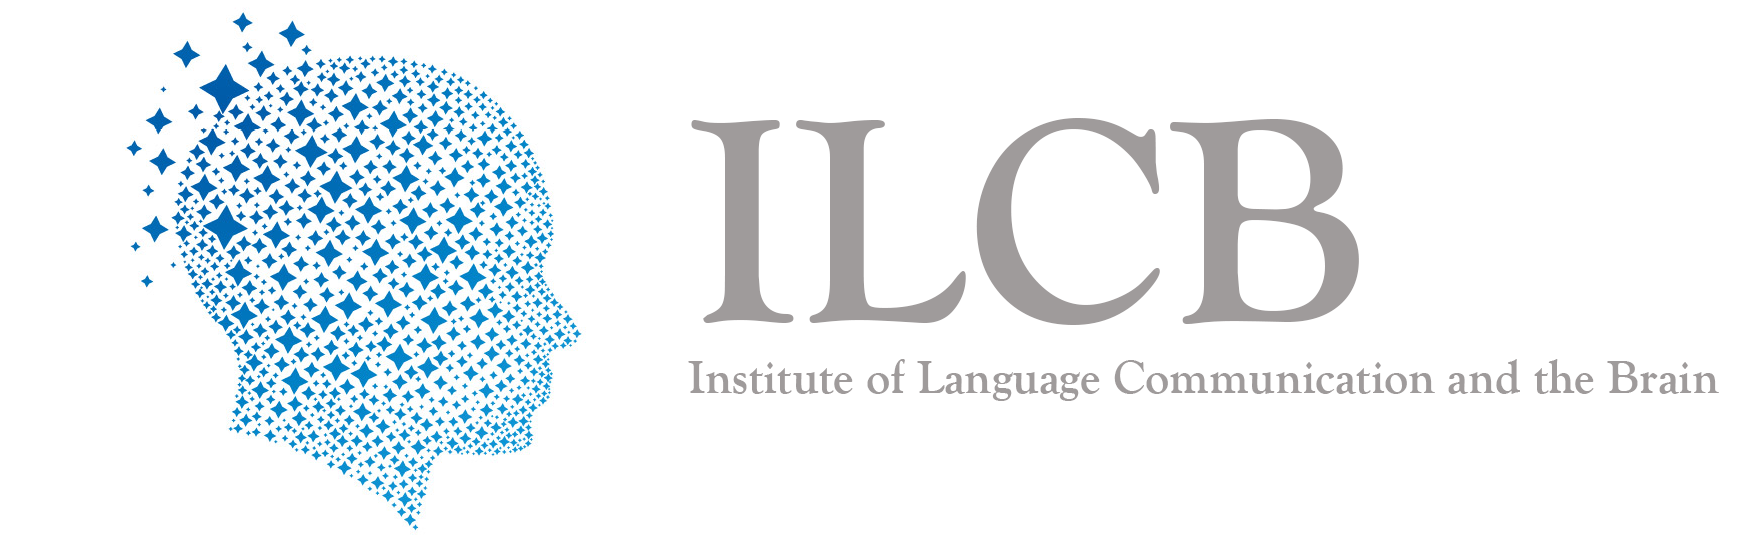 Institute of Language Communication and the Brain